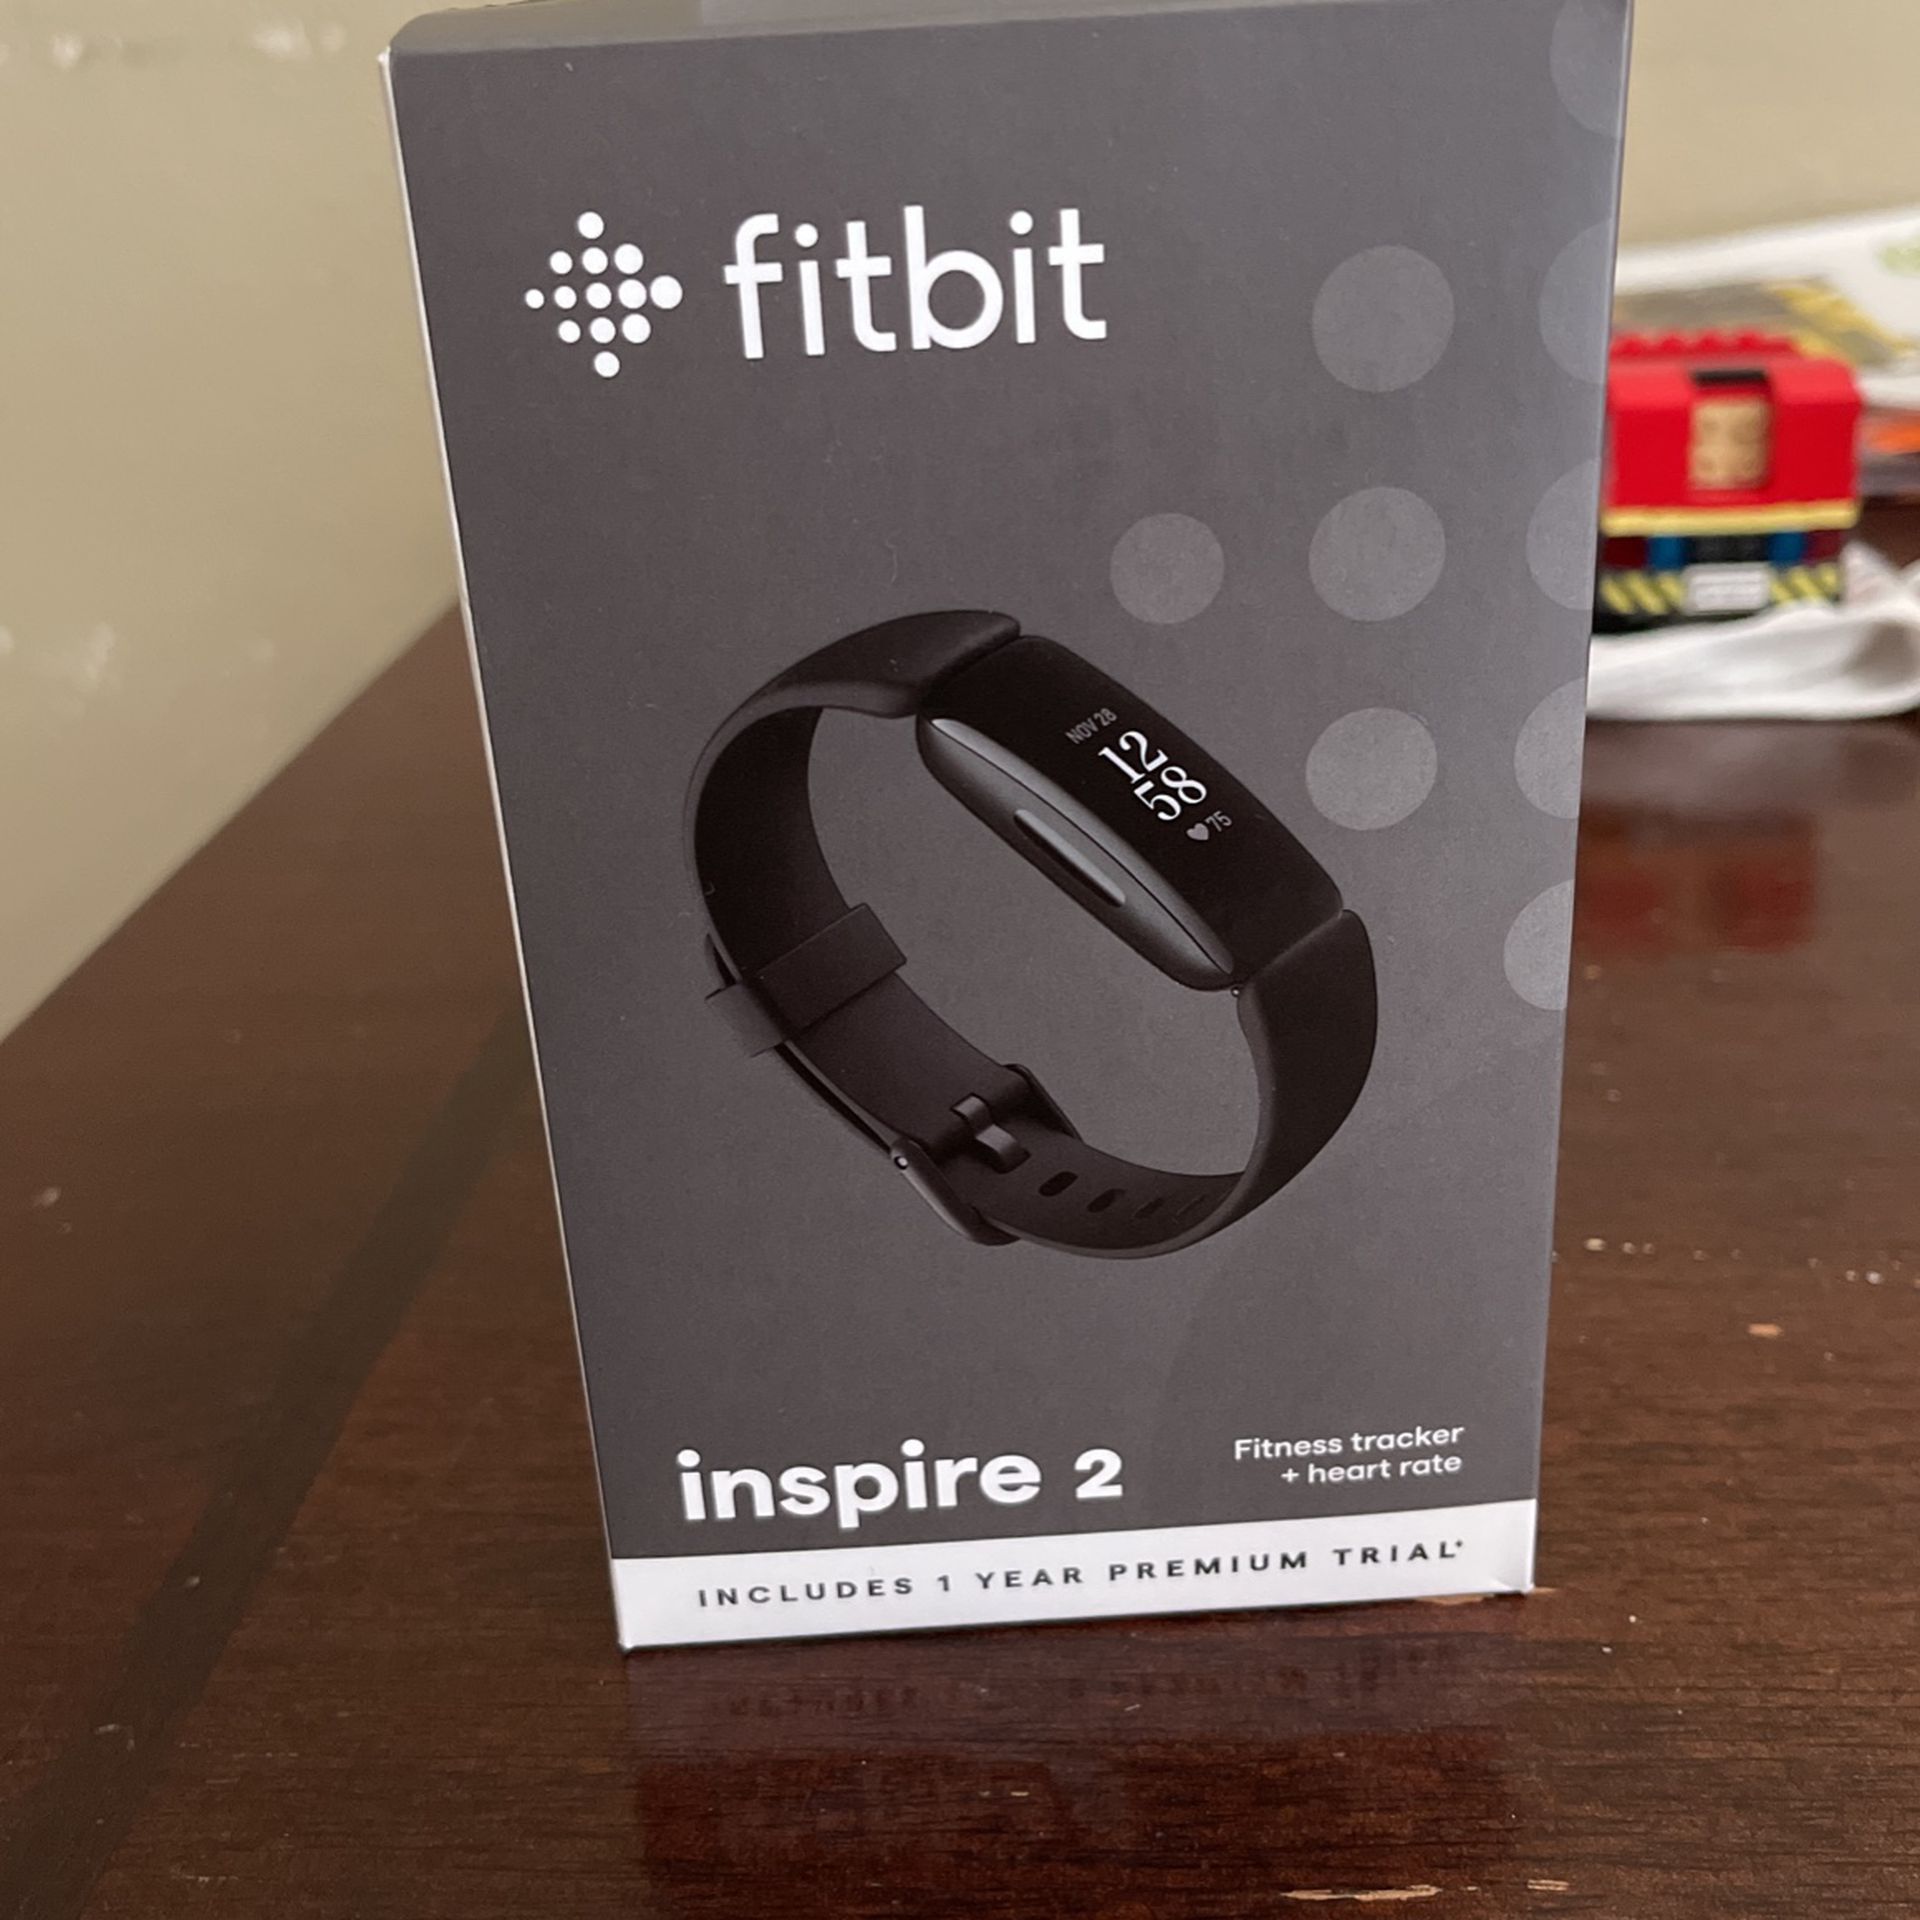 Fitbit Inspire 2 Health & Fitness Tracker +Heart Rate